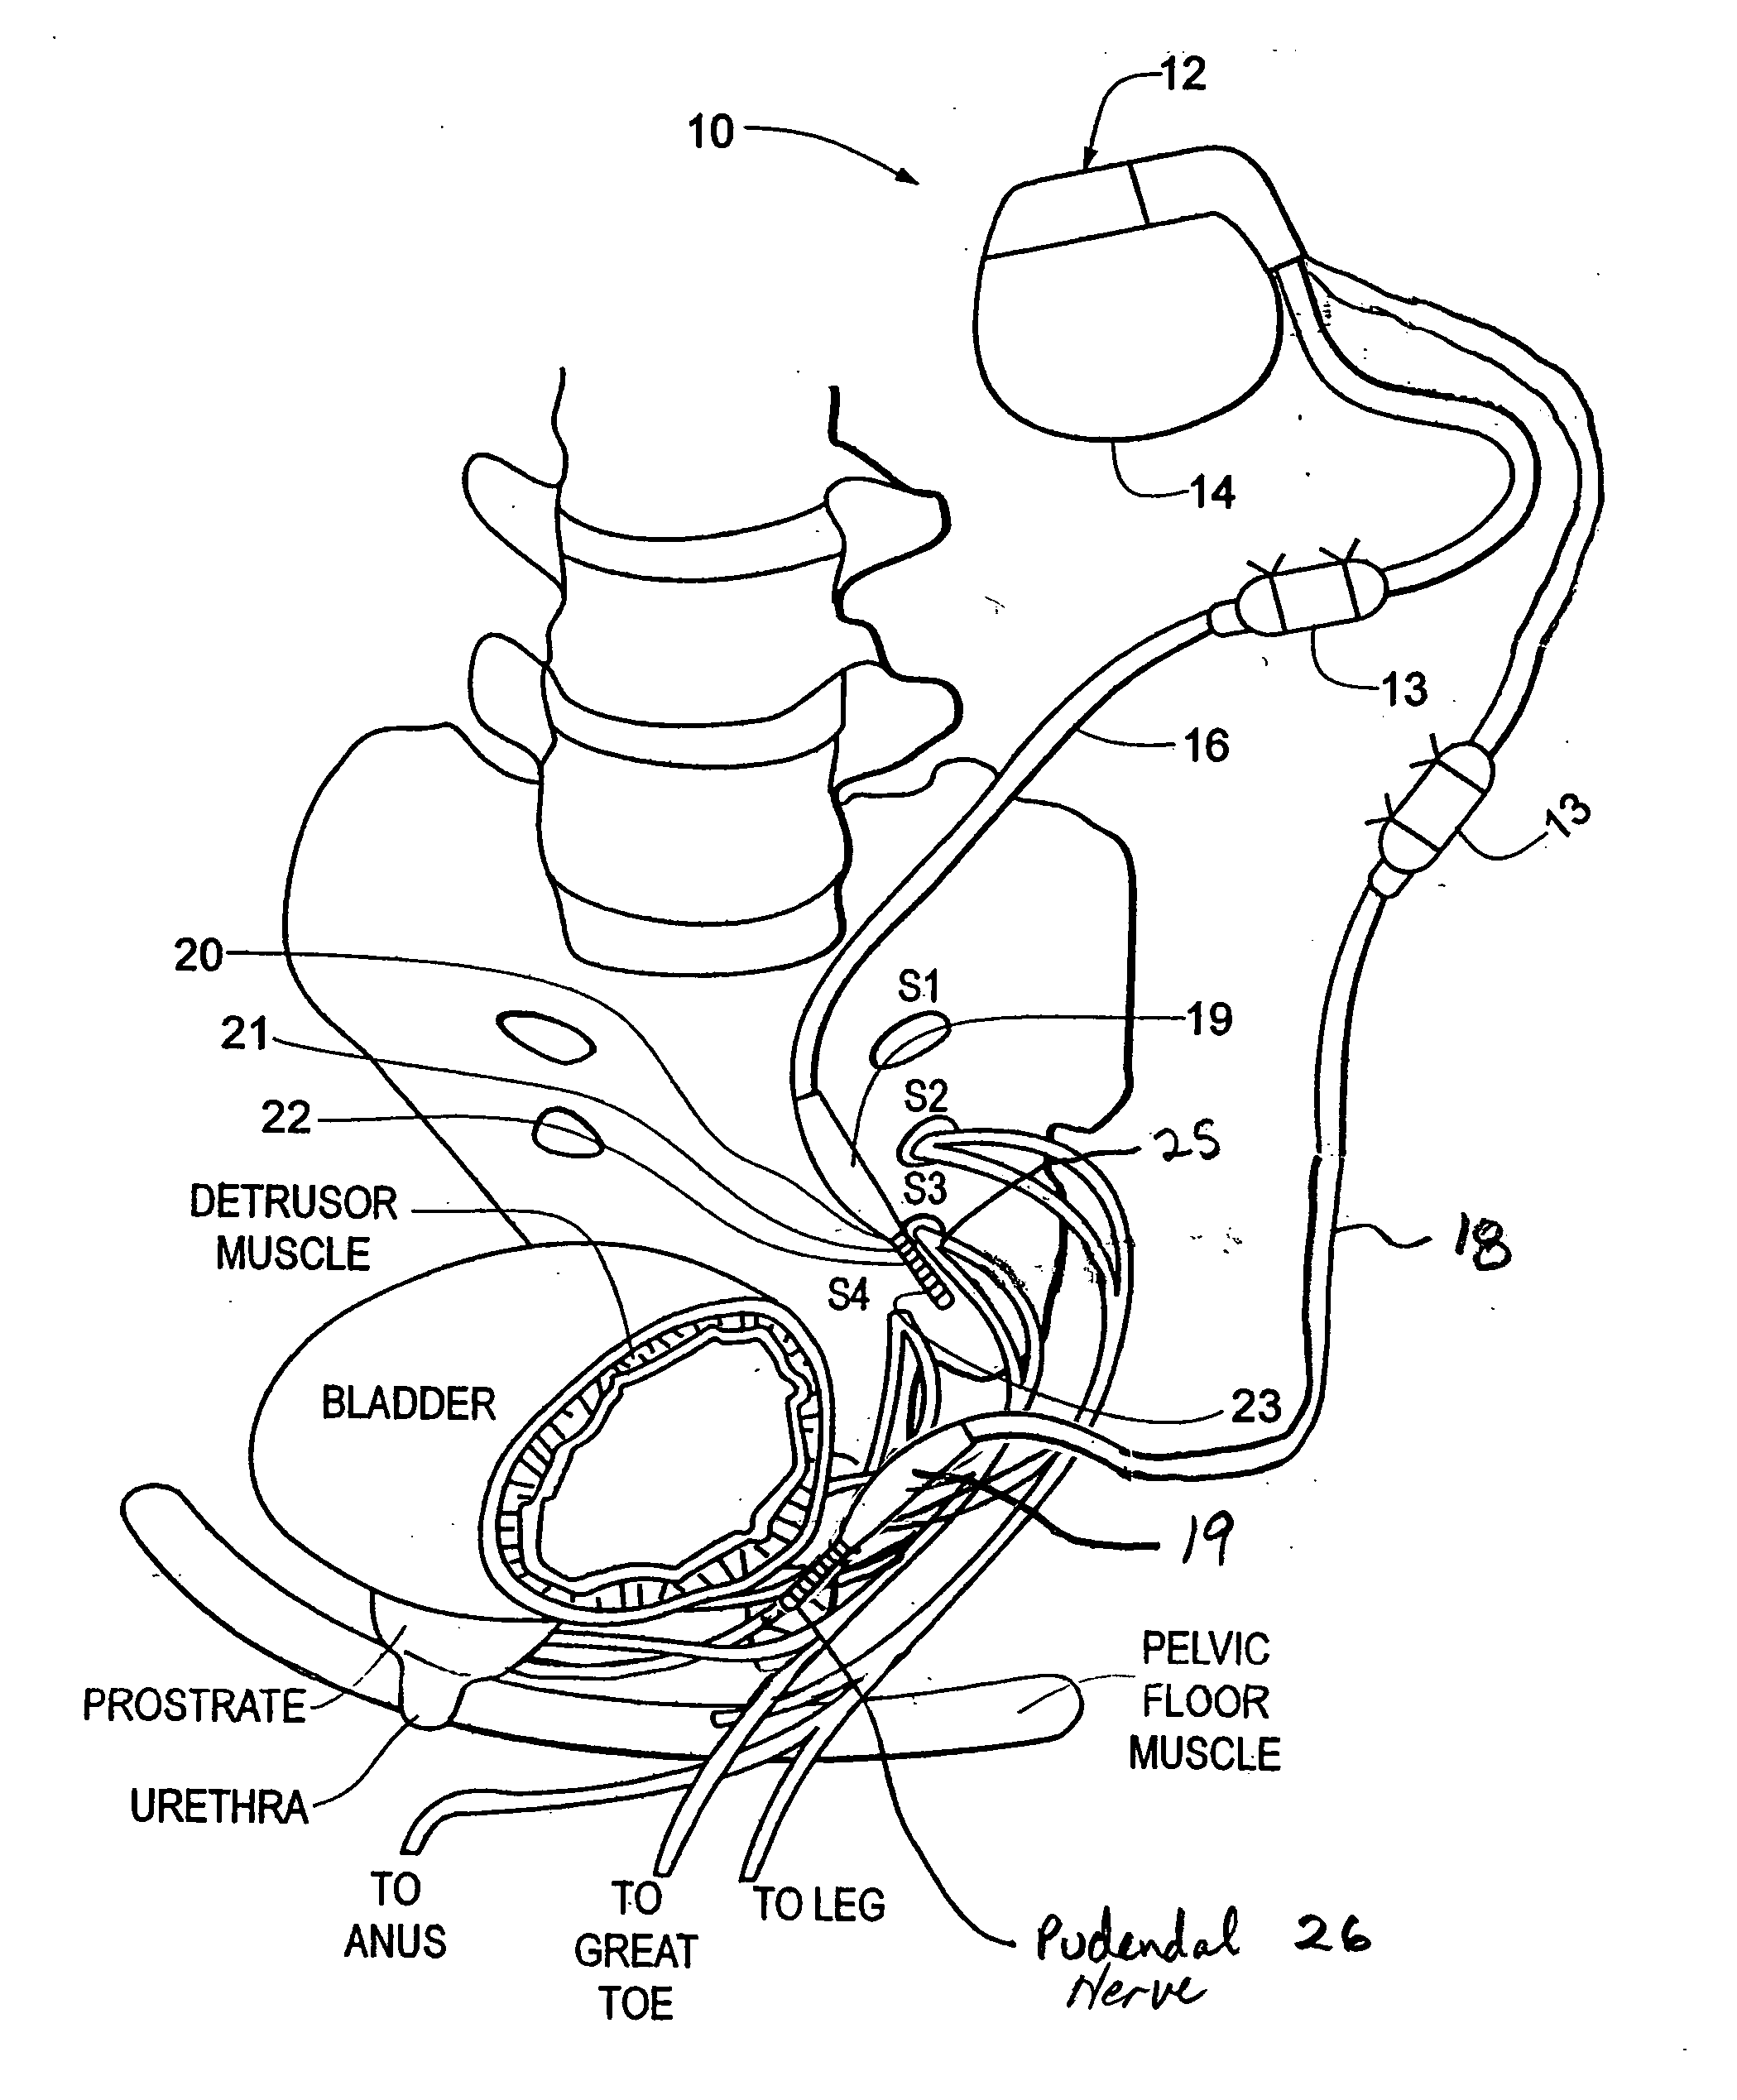 Method, system and device for treating various disorders of the pelvic floor by electrical stimulation of the pudendal nerves and the sacral nerves at different sites